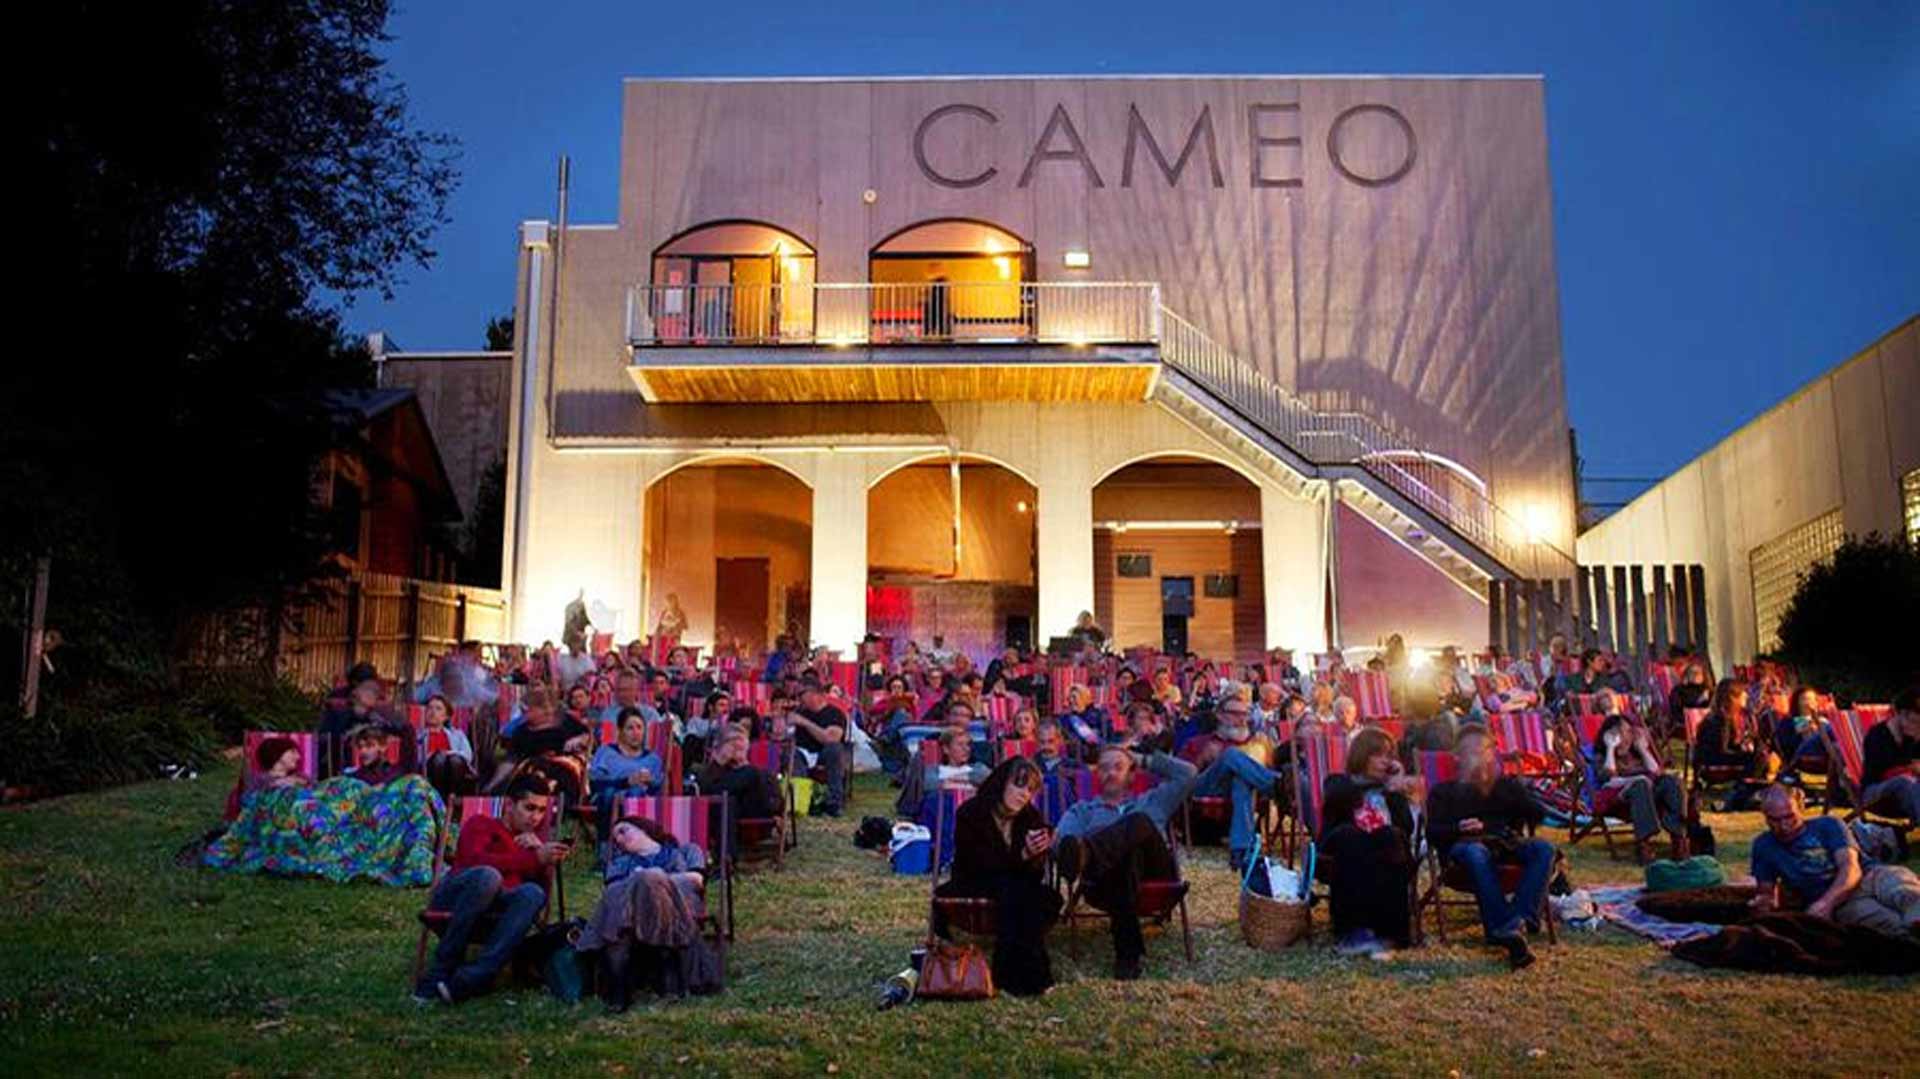 Classic, Lido and Cameo Outdoor Cinemas Are Reopening from November 2